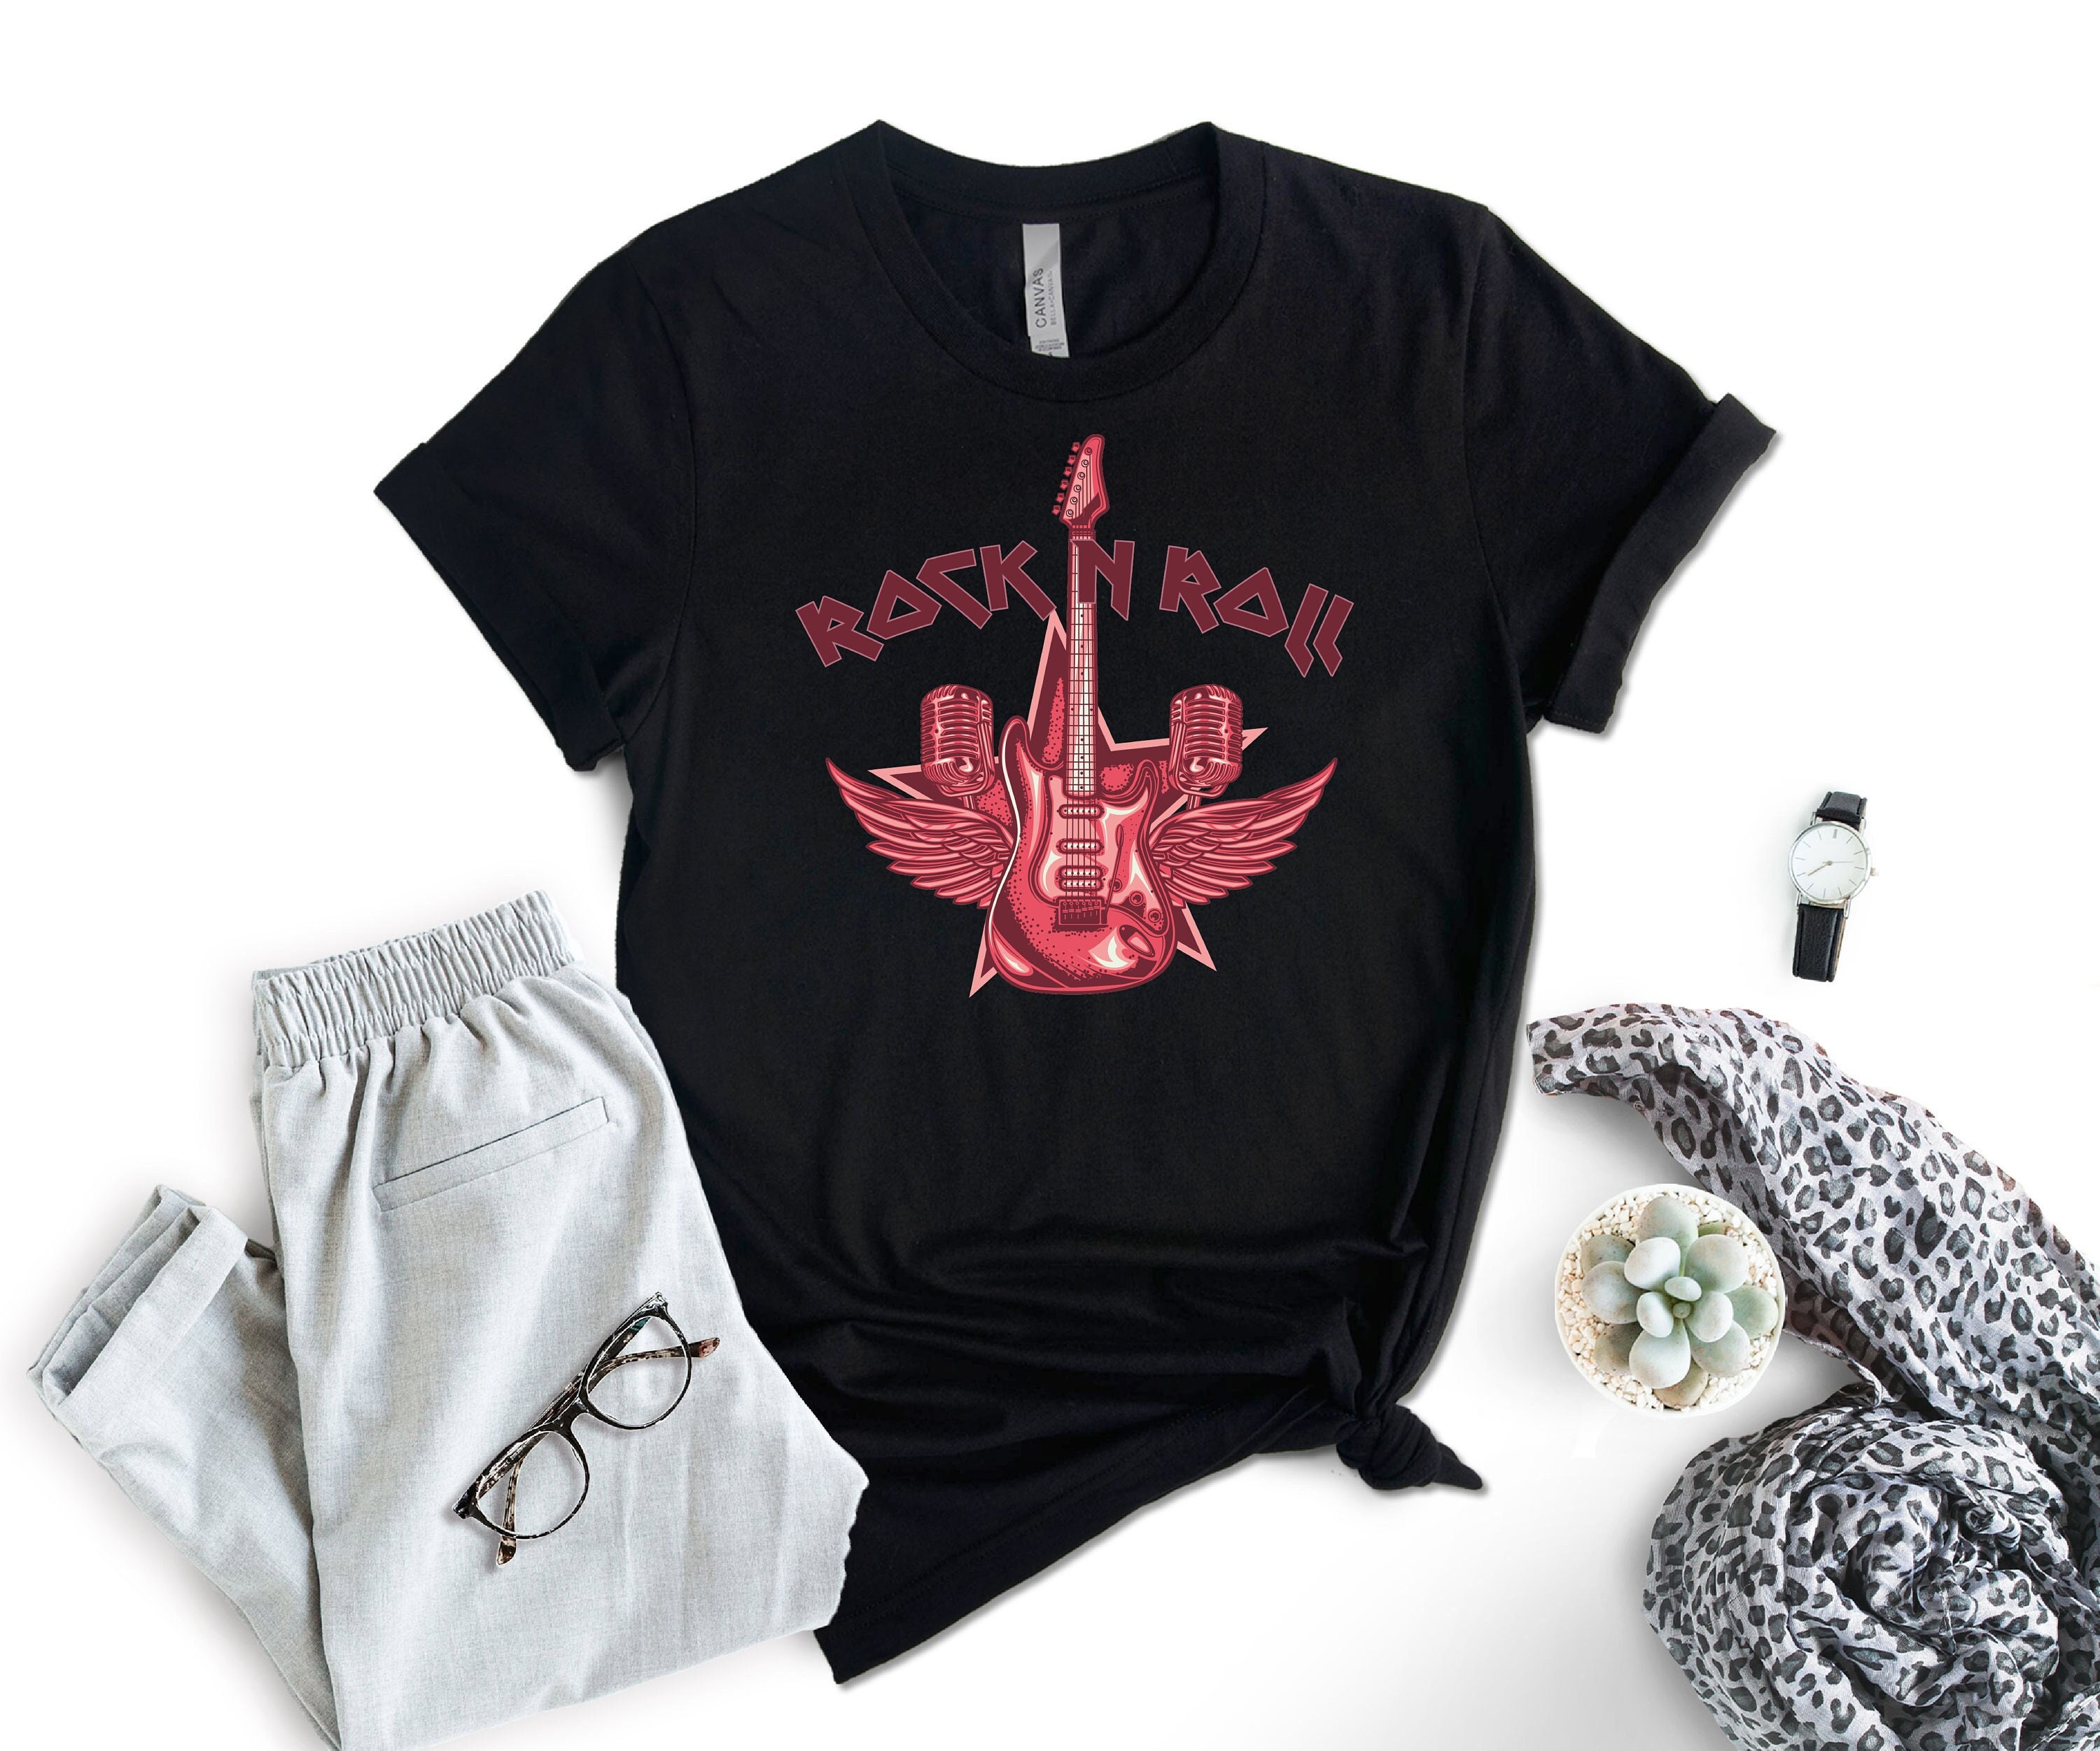 Discover Vintage Rock And Roll Shirt, Rock Band T-Shirt